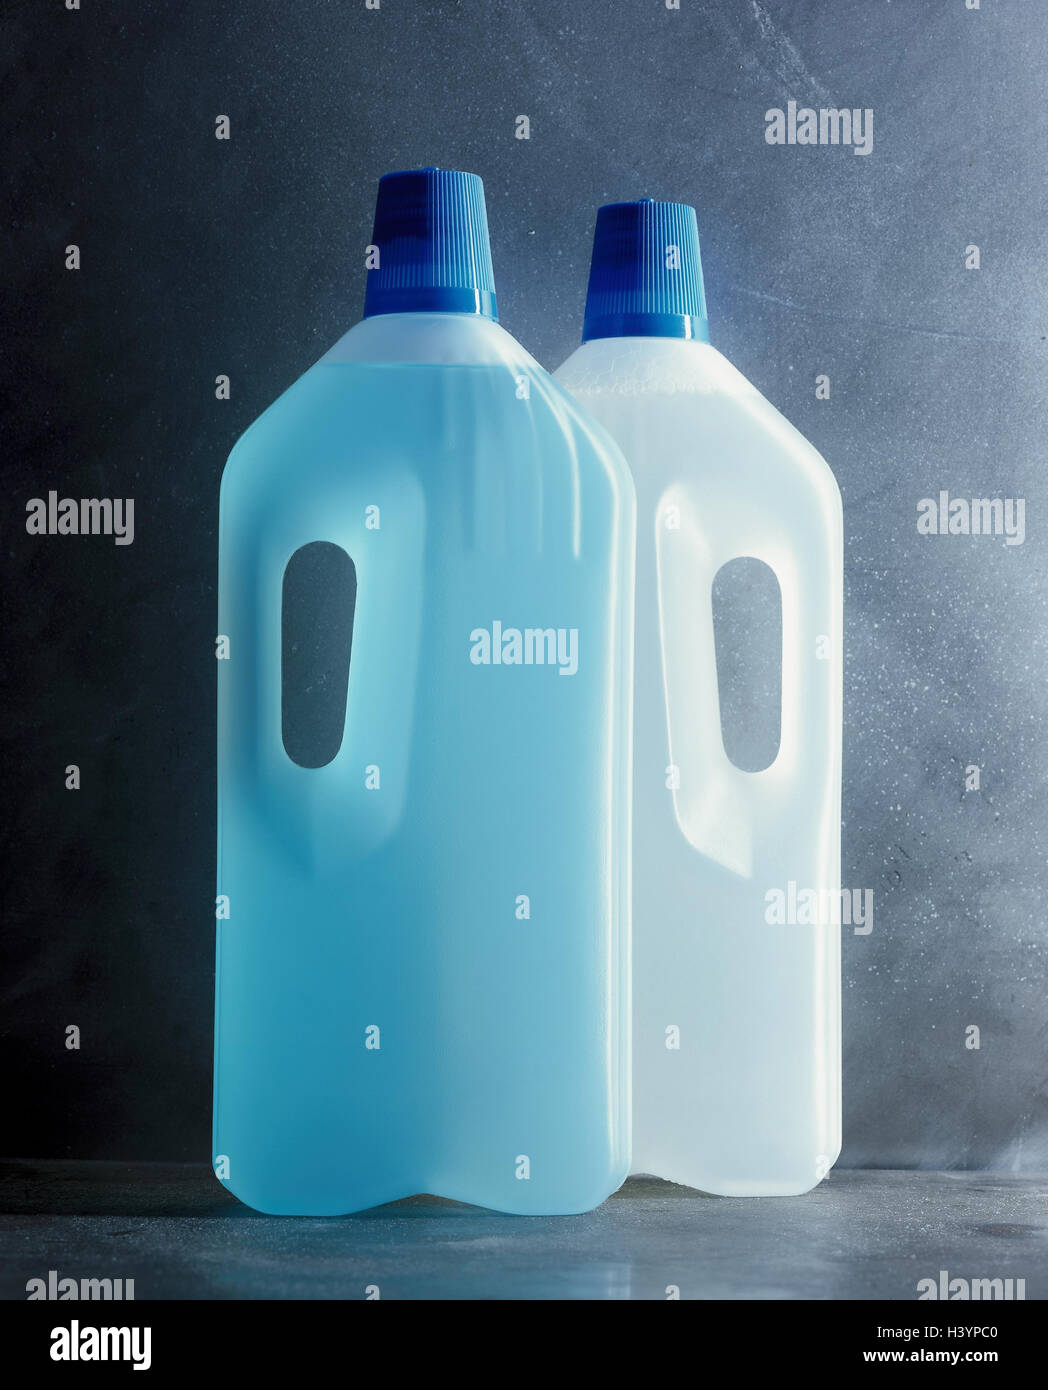 Plastic flasks, cleaning agents, colours, differently, household, cleaning implements, cleaning materials, household, envelope, plastic flasks, plastic flasks, flasks, clean, clean, blue, transparent, cleaning, material recording, Still life Stock Photo